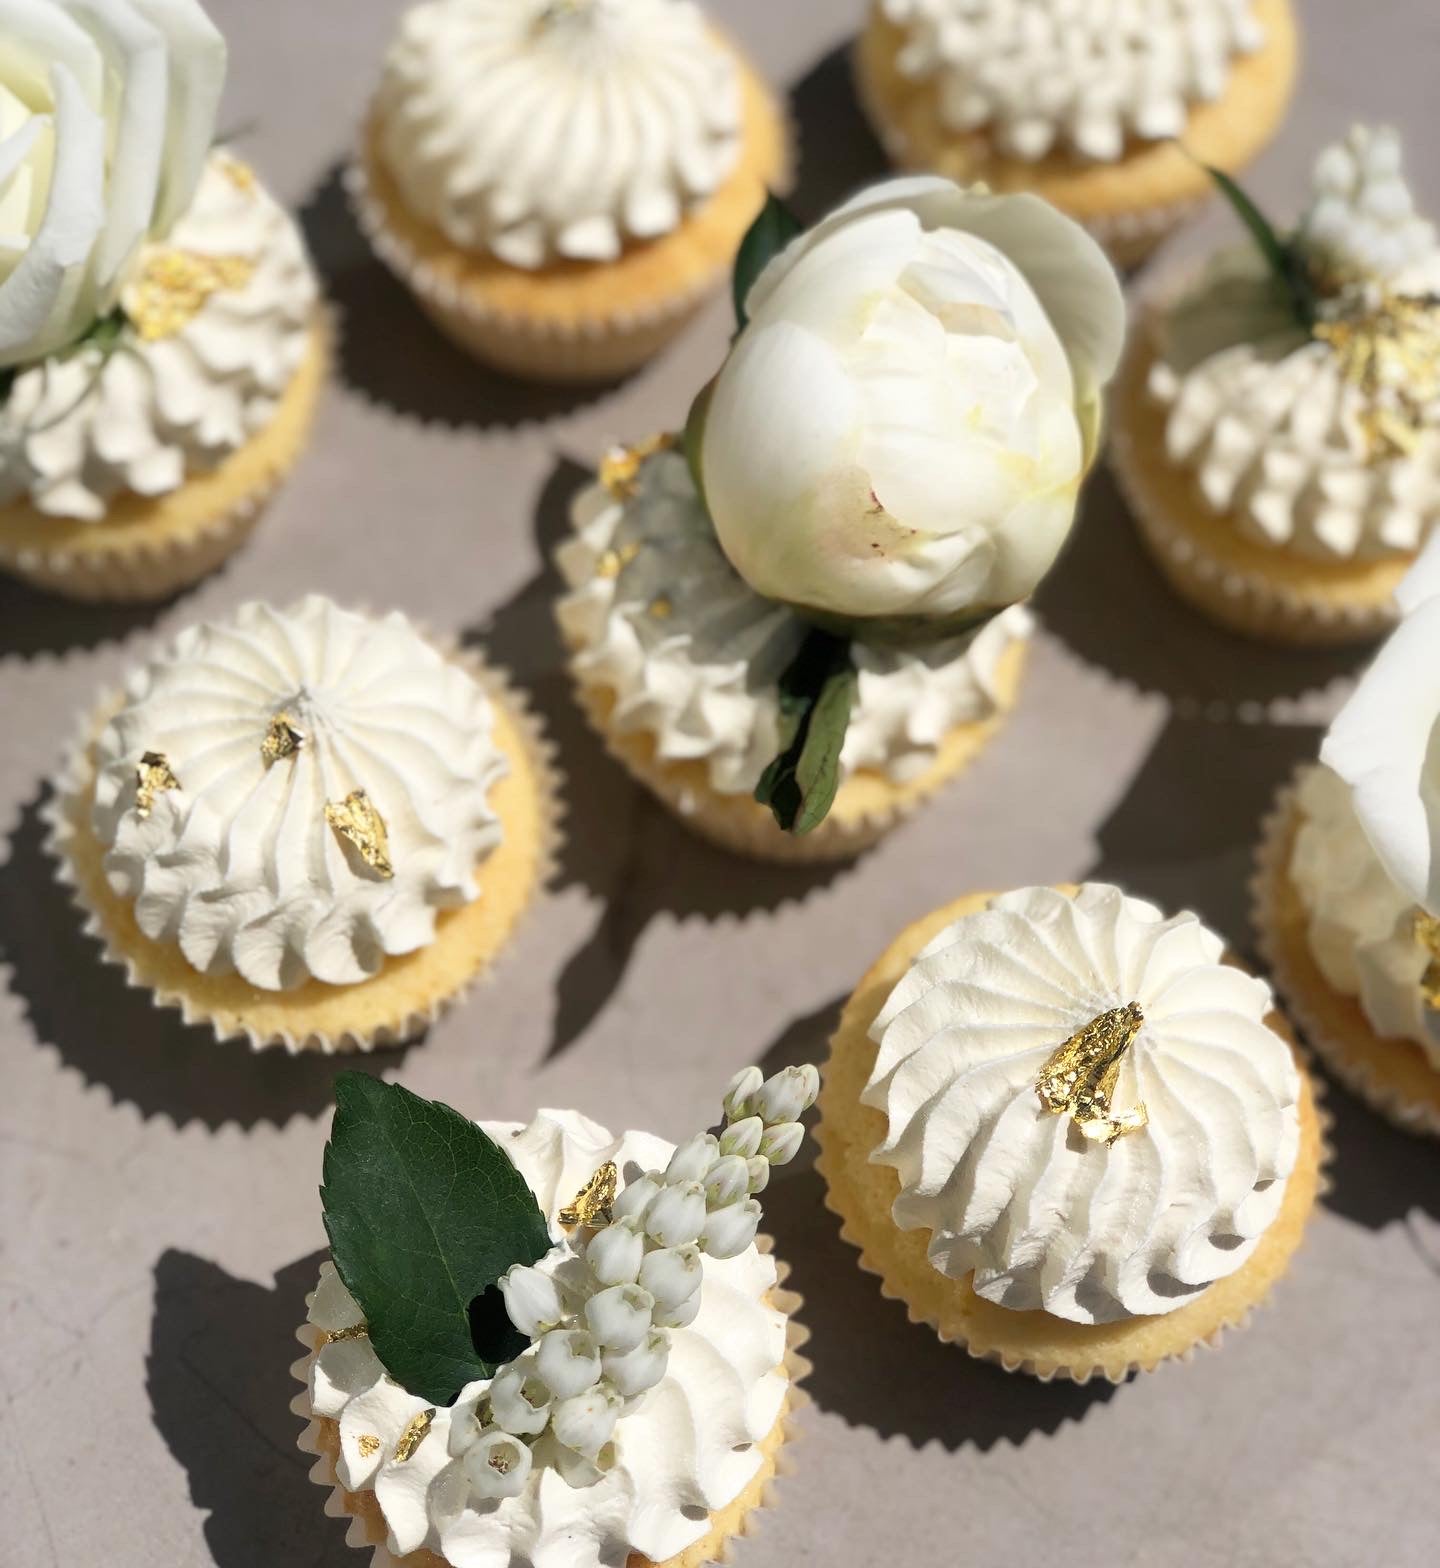 White Cupcake with Gold Foil | Our favourite Wedding Vendors | The Paper Gazelle